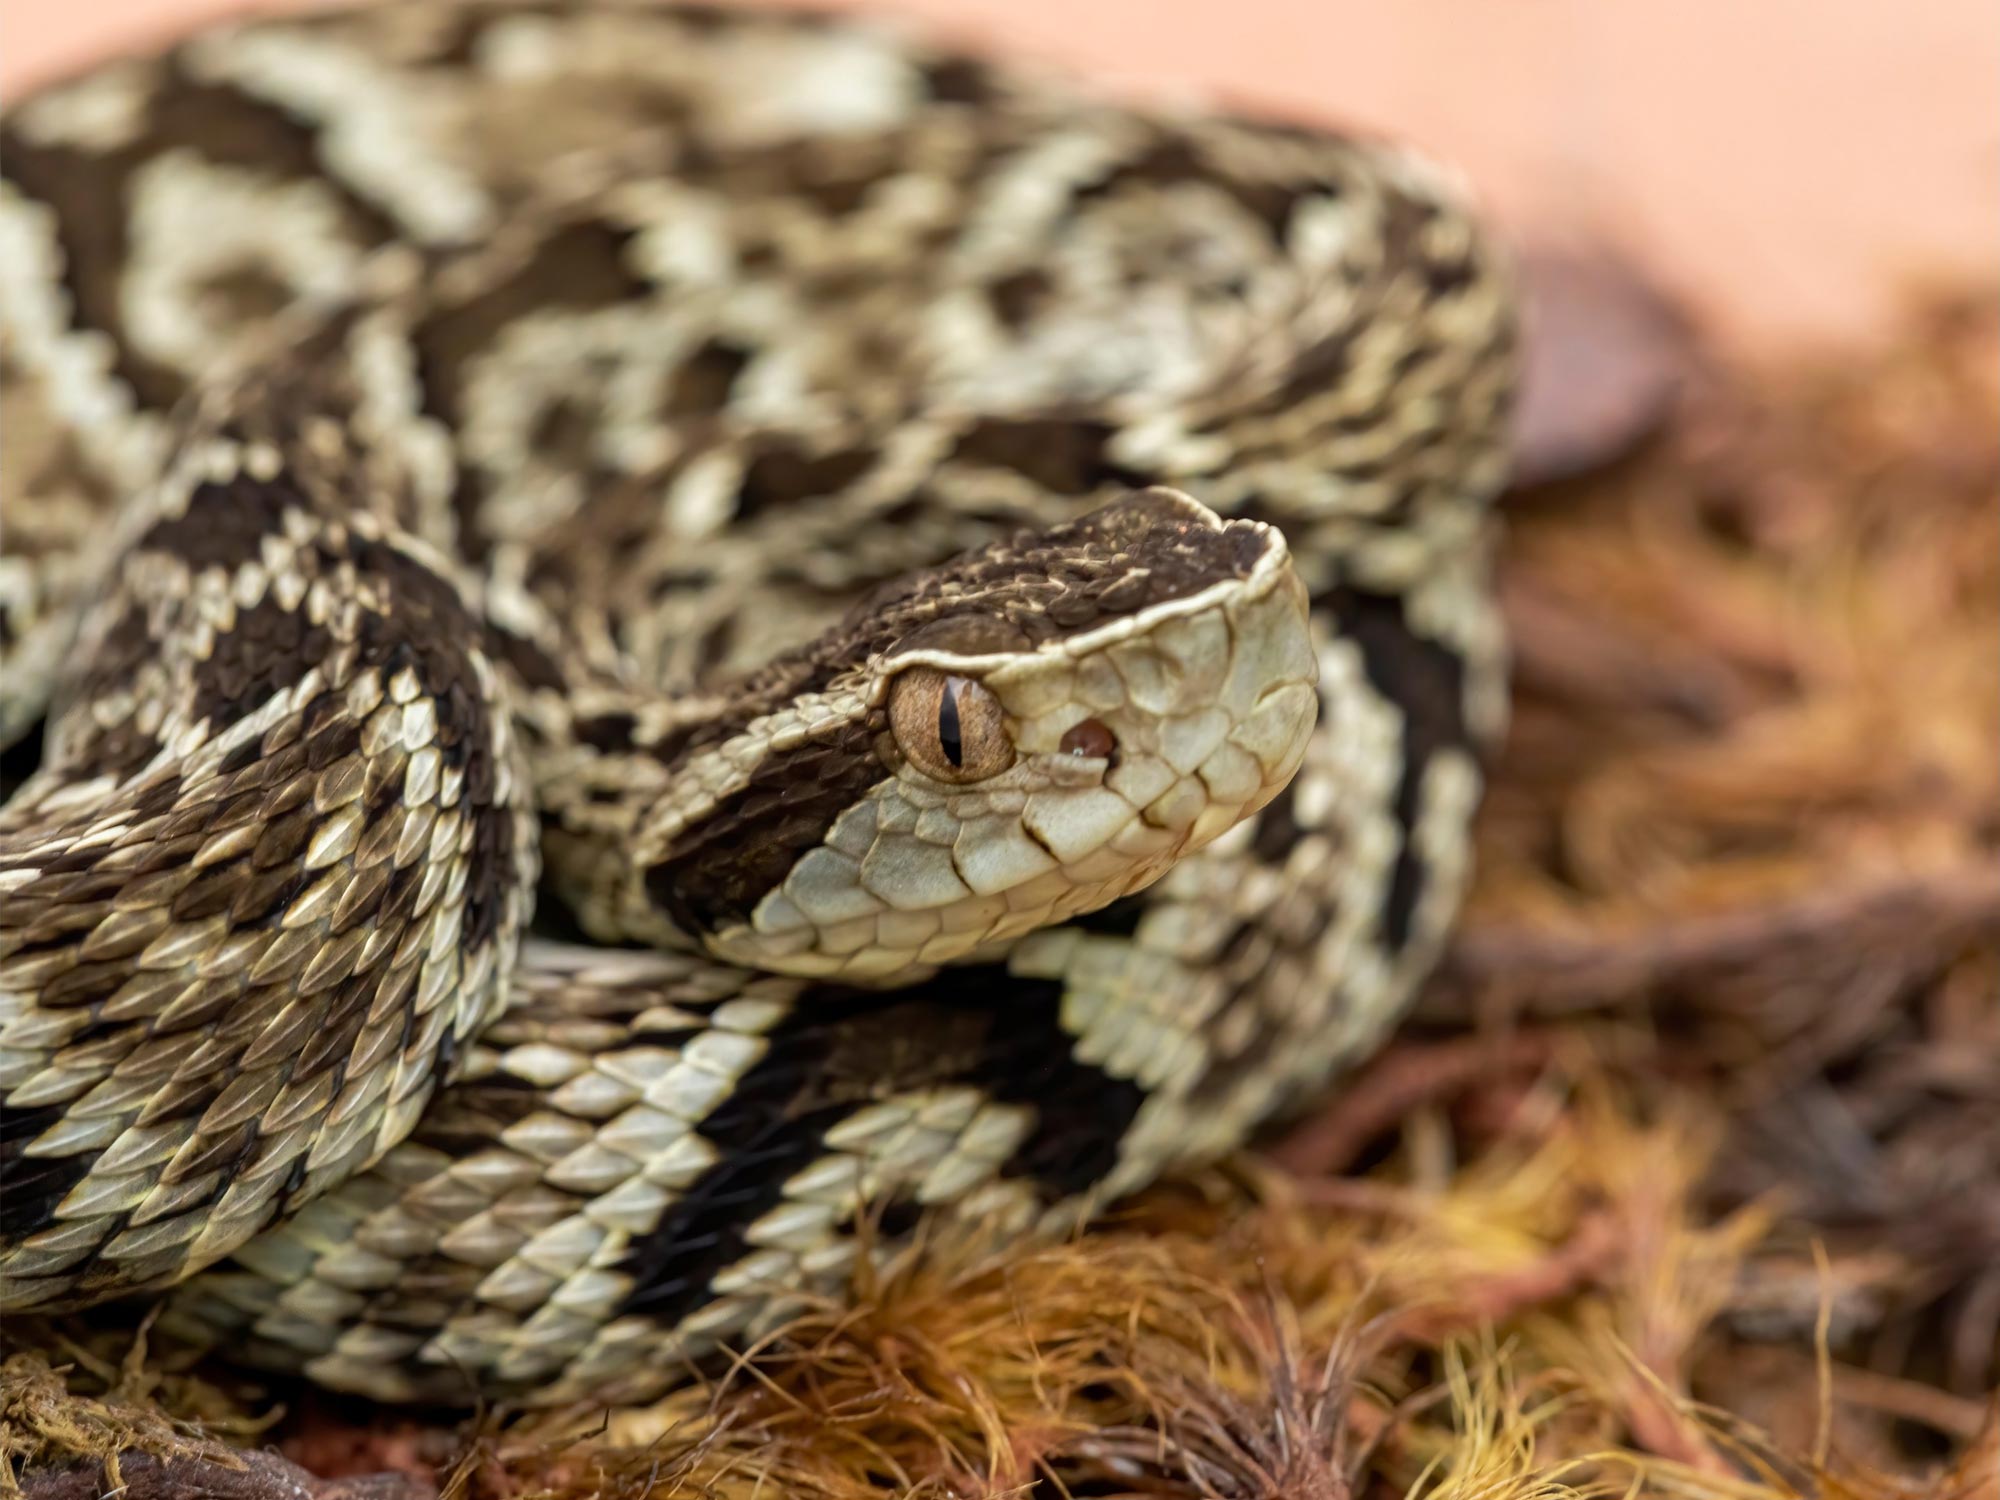 First Genetic Sequencing Of Brazilian Pit Viper Completed Reveals